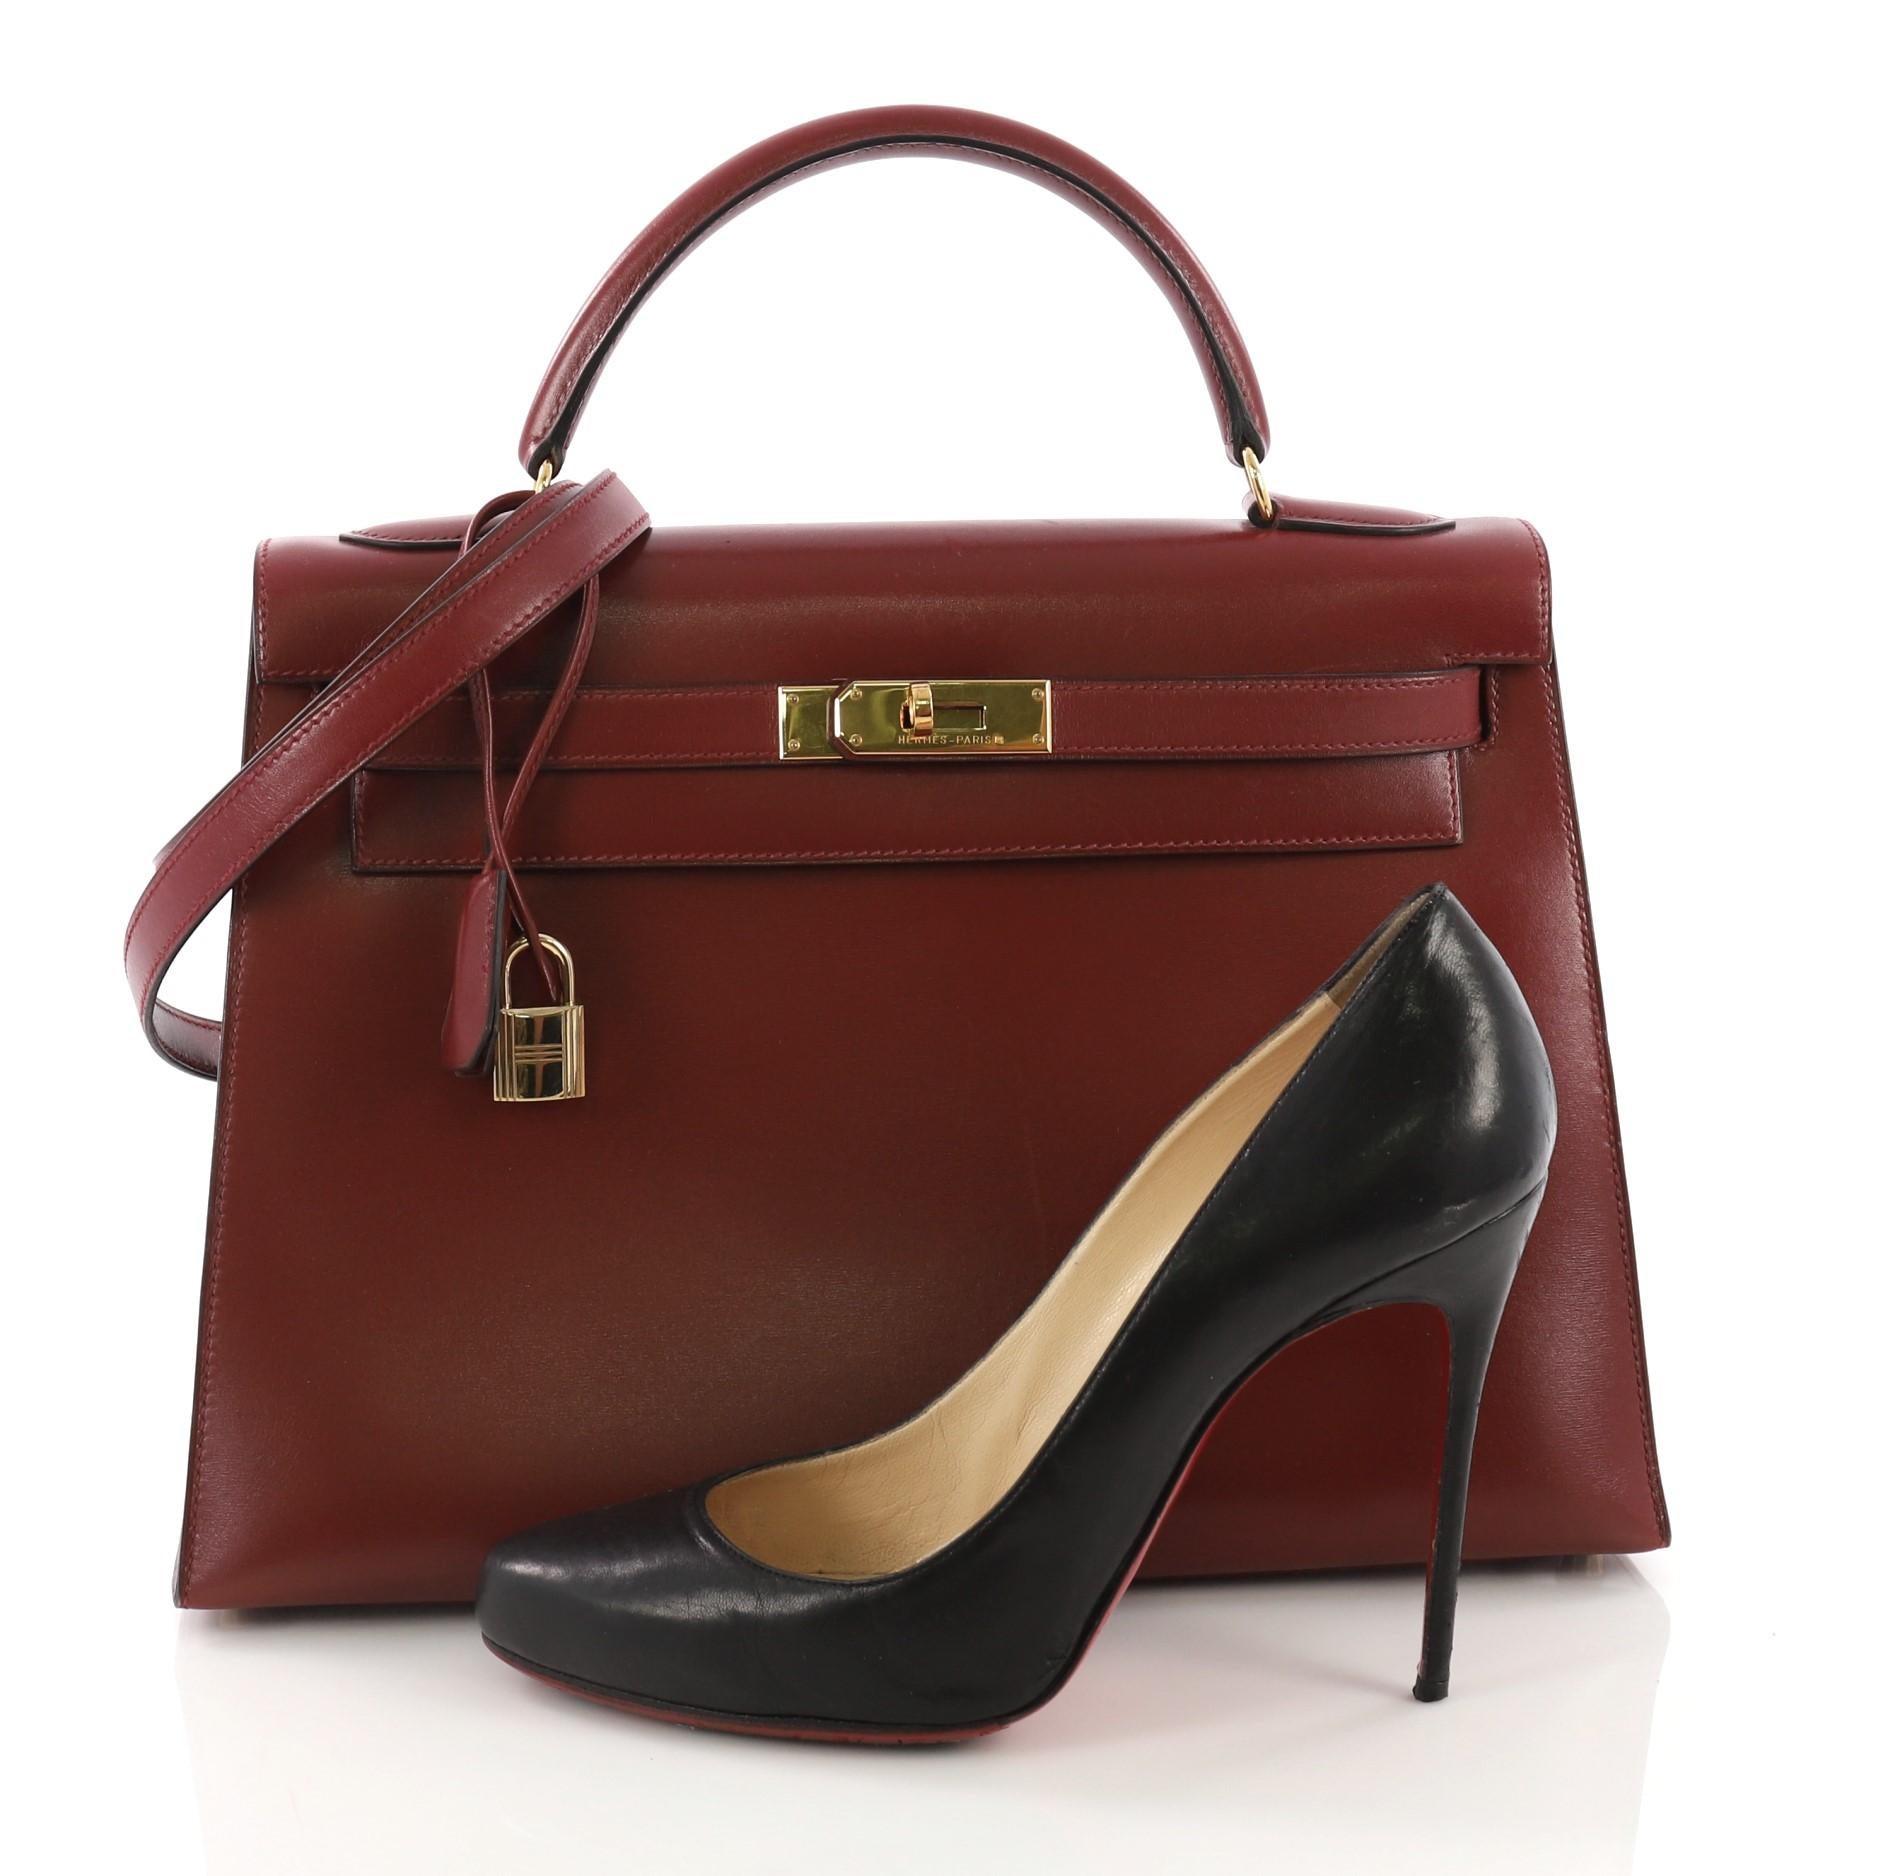 This Hermes Kelly Handbag Rouge H Box Calf with Gold Hardware 32, crafted from red Rouge H Box calf leather, features a single looped top handle, frontal flap, and gold-tone hardware. Its turn-lock closure opens to a red leather interior with zip